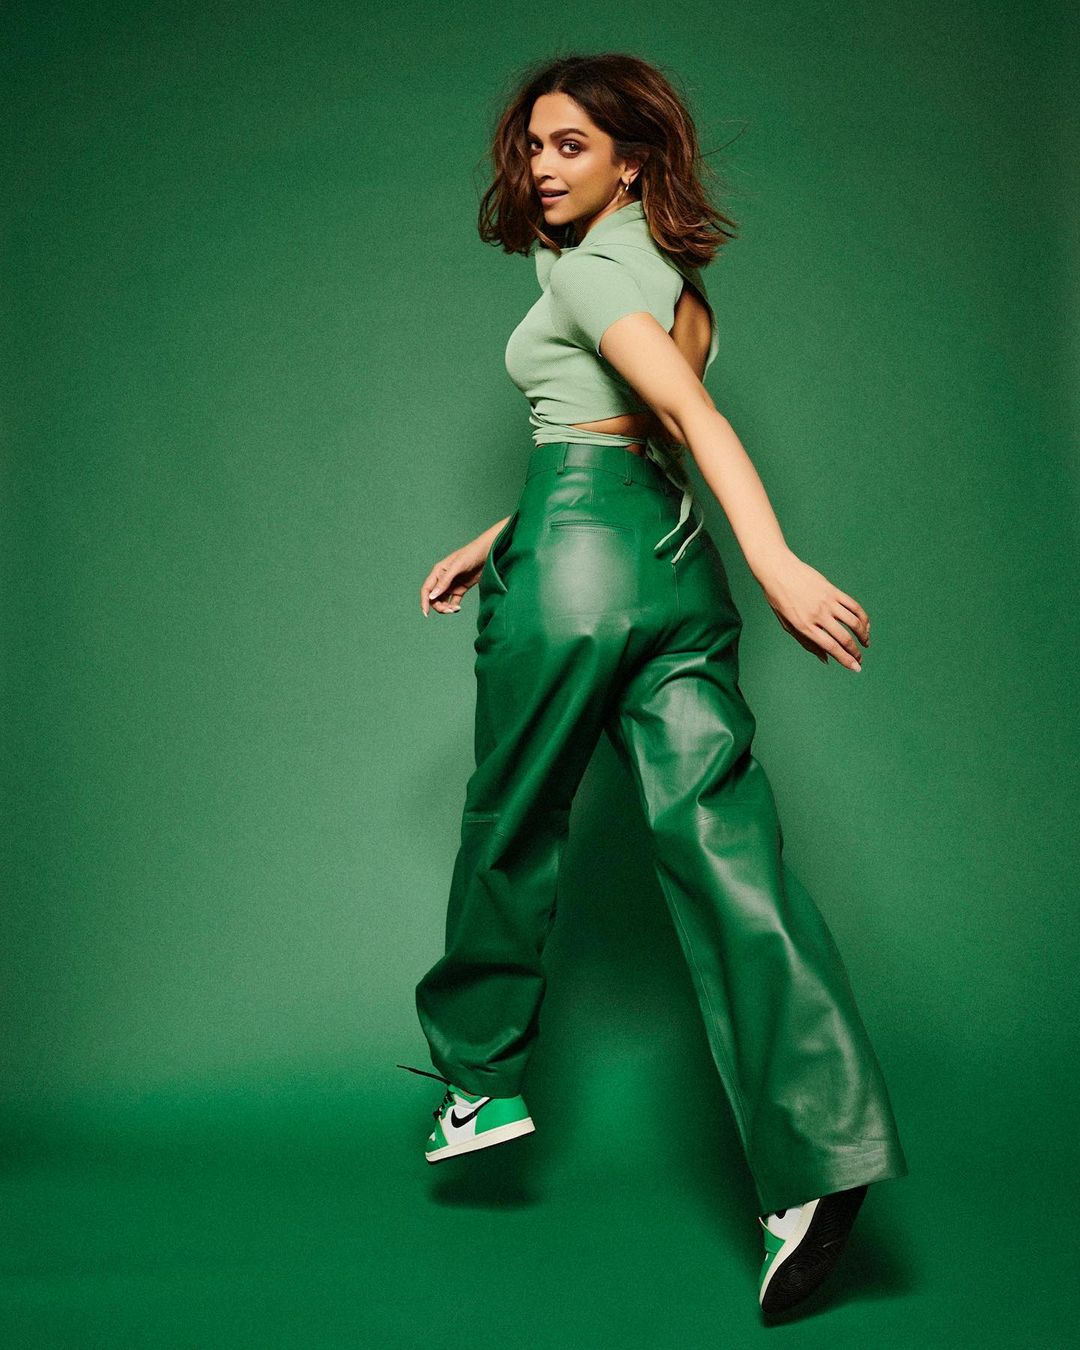 Deepika Padukone aces the smart casual look in the green faux leather pants and complimenting top